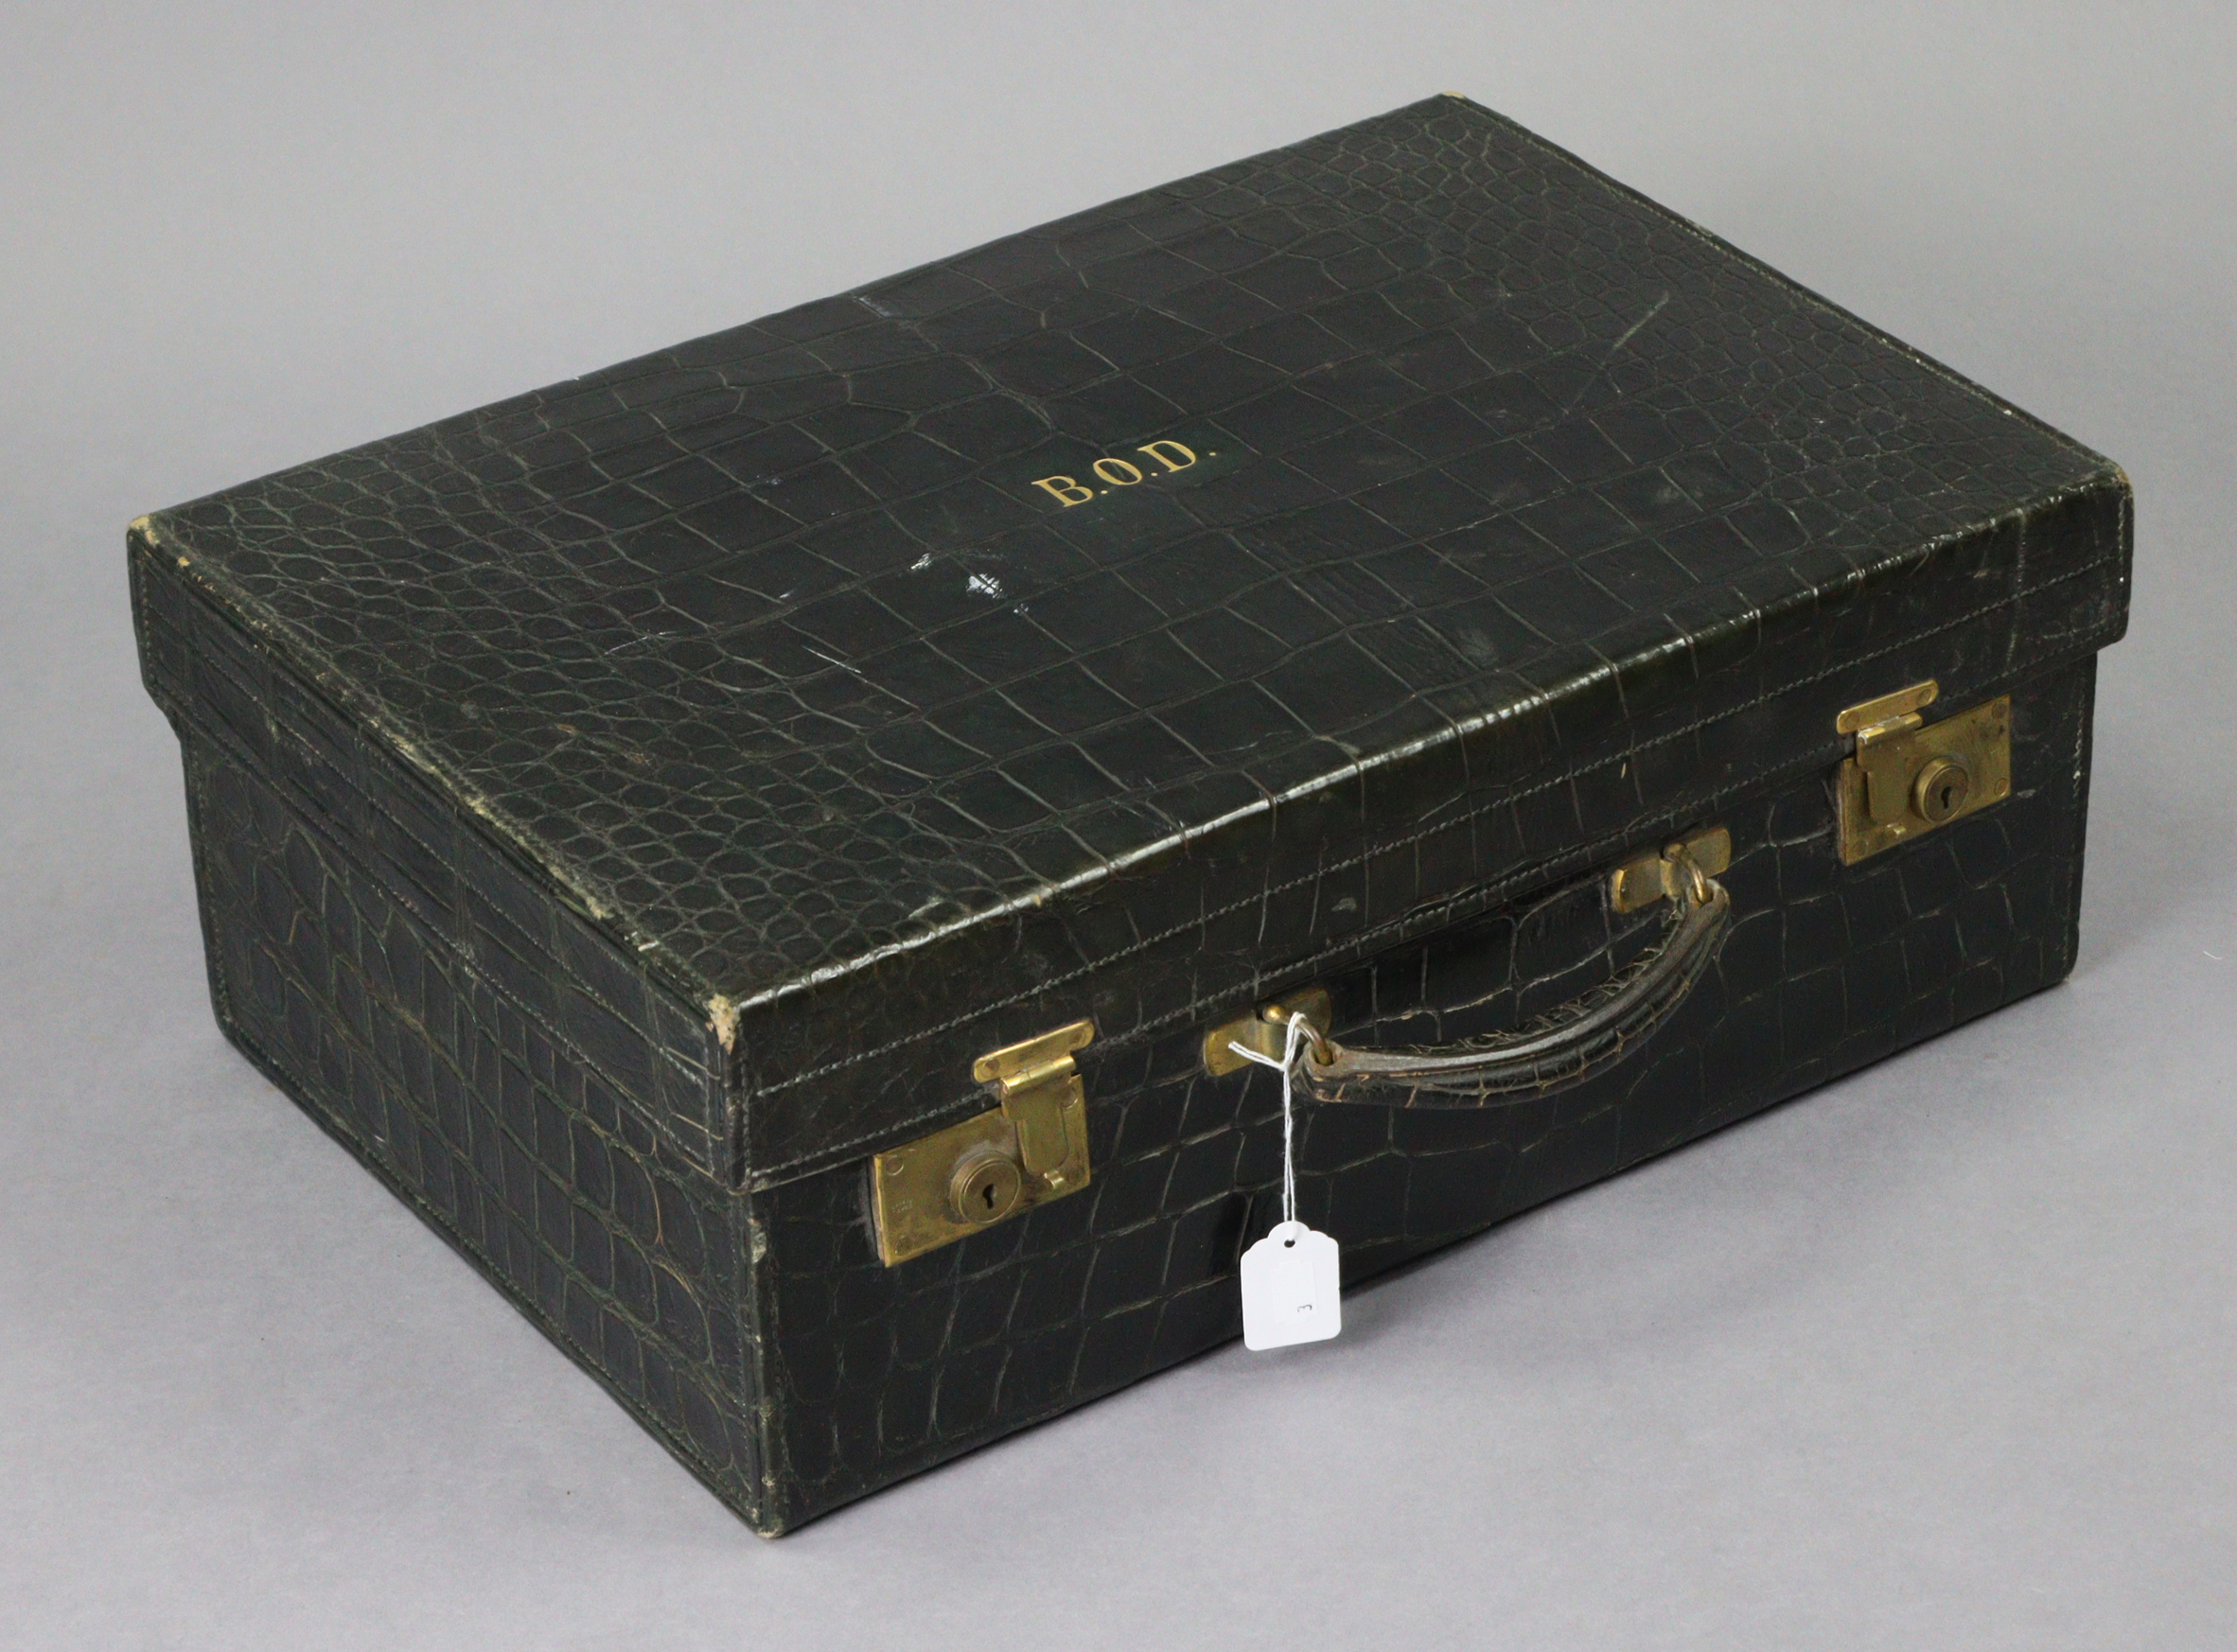 A late 19th/early 20th century dark green finish crocodile-skin suitcase with brass twin-lever